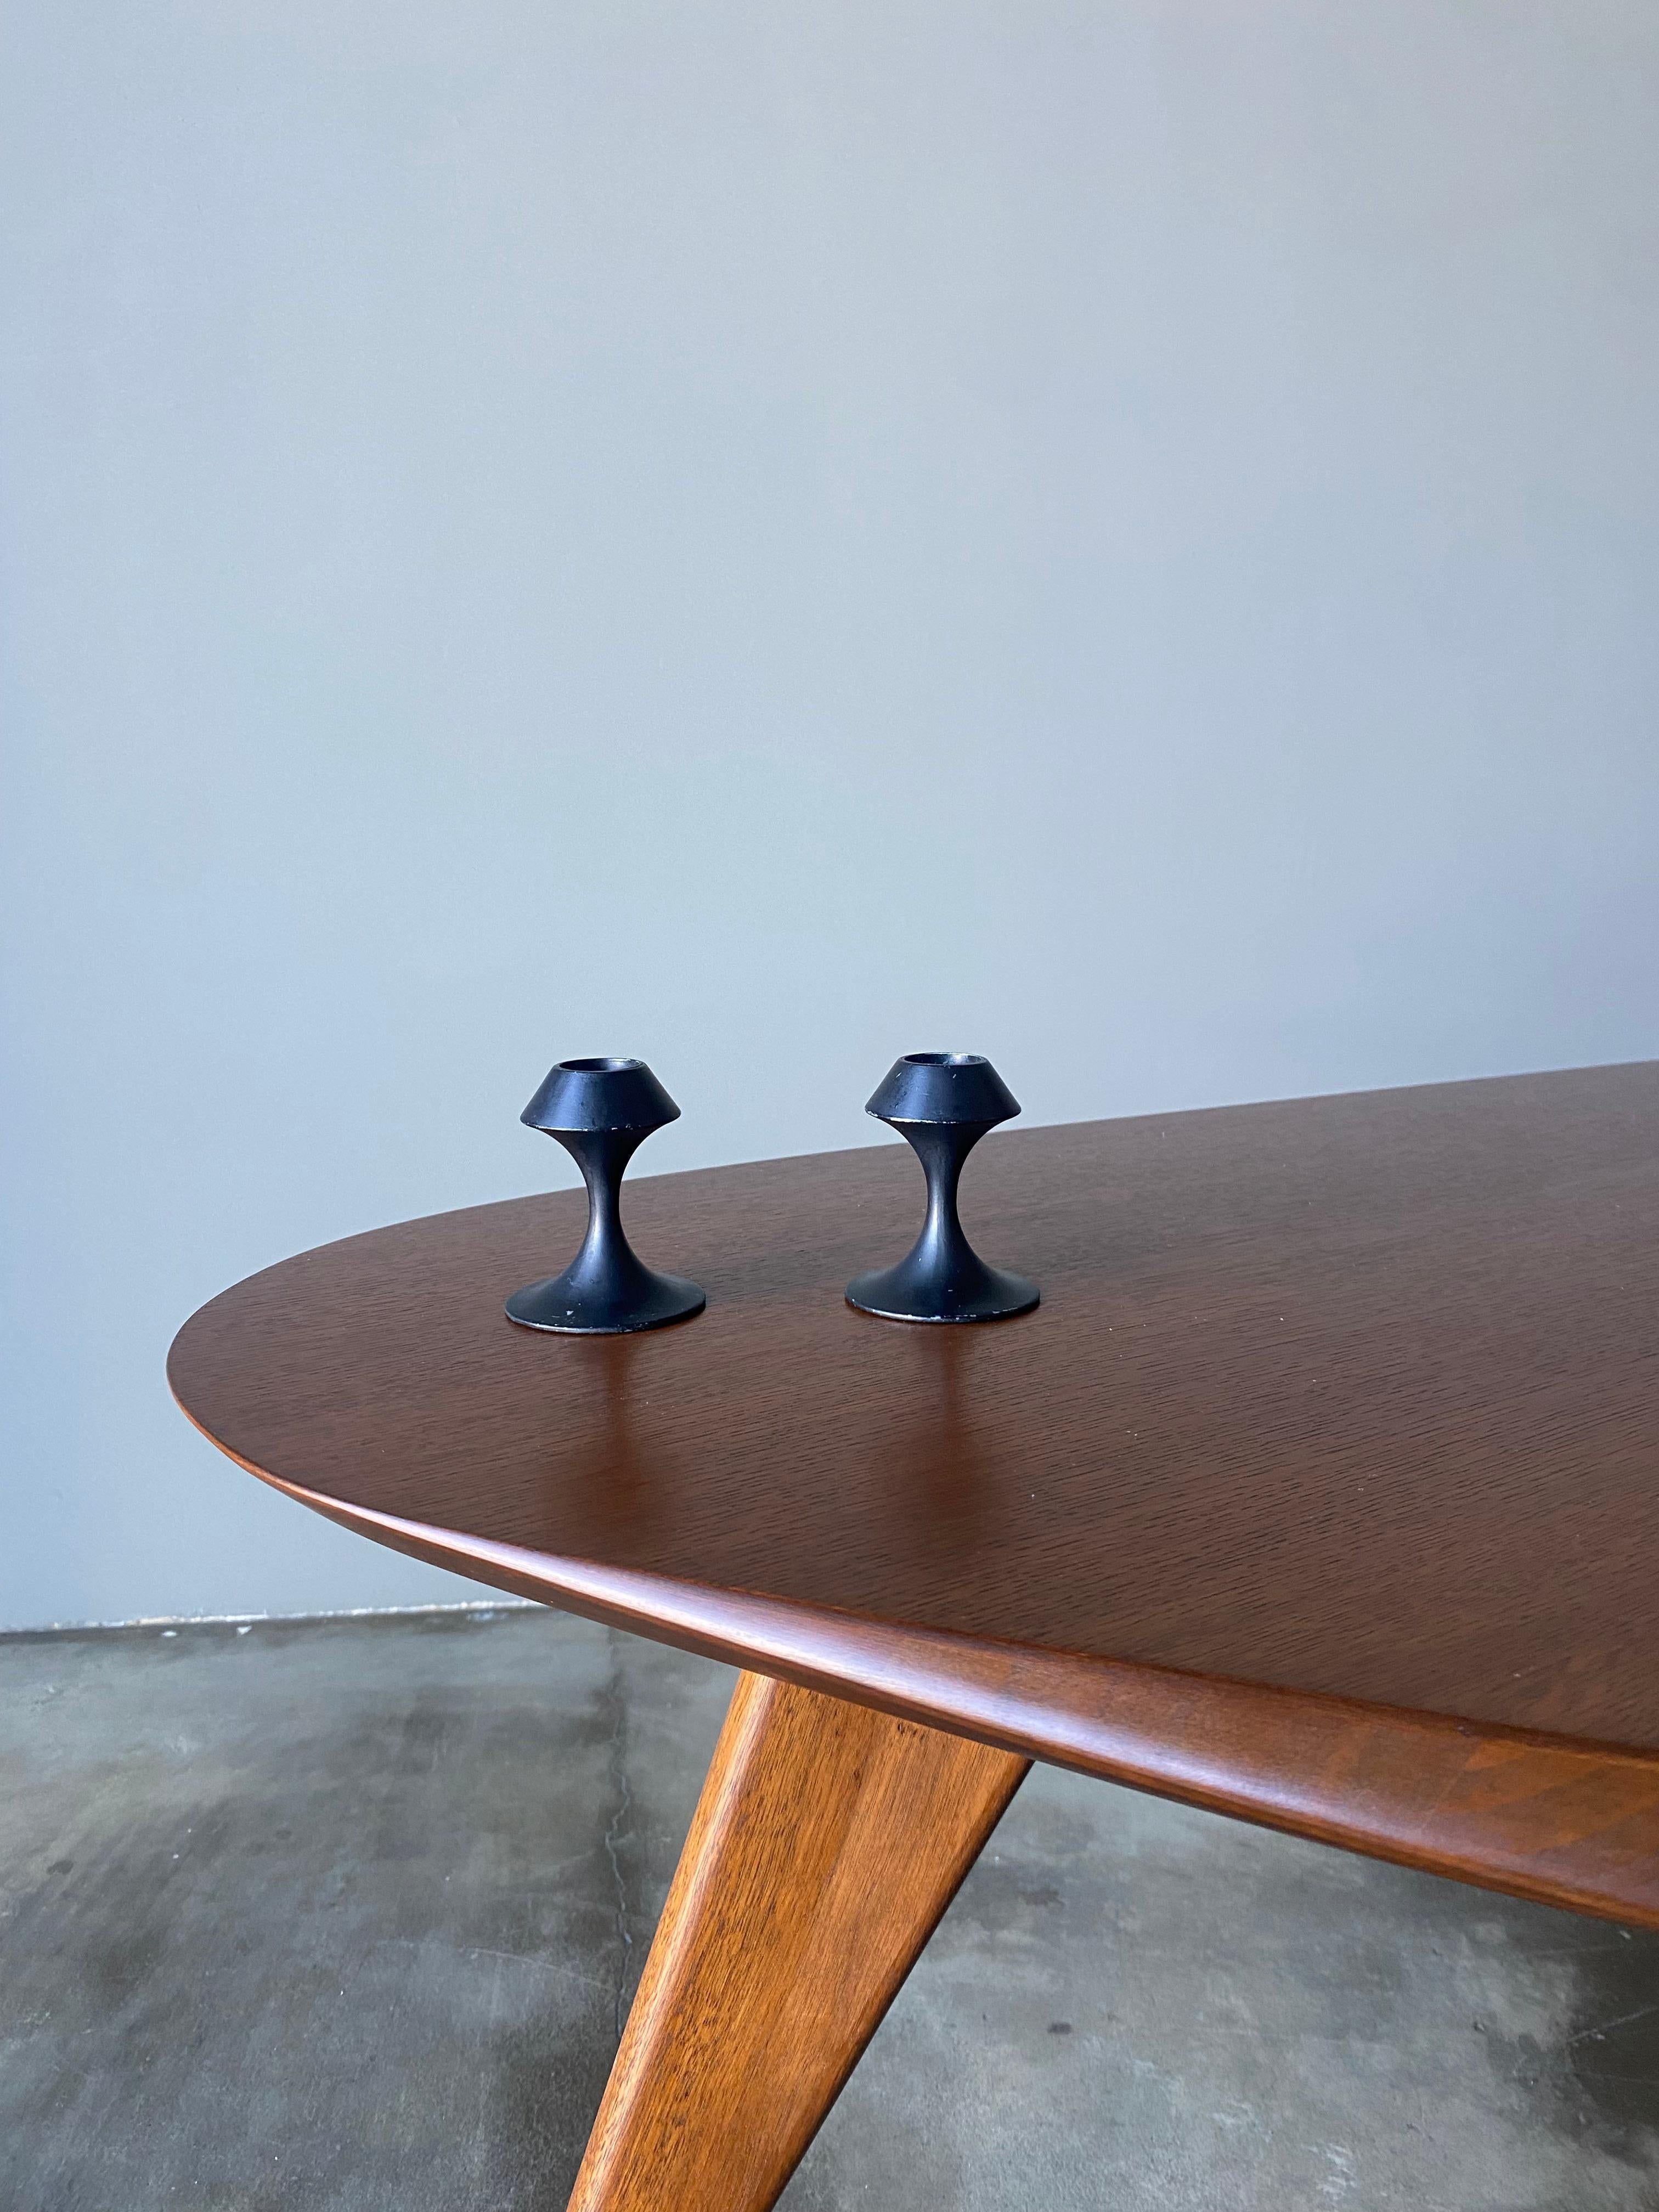 Hand-Crafted Modernist Candle Holders Designed By Lenox For Sale